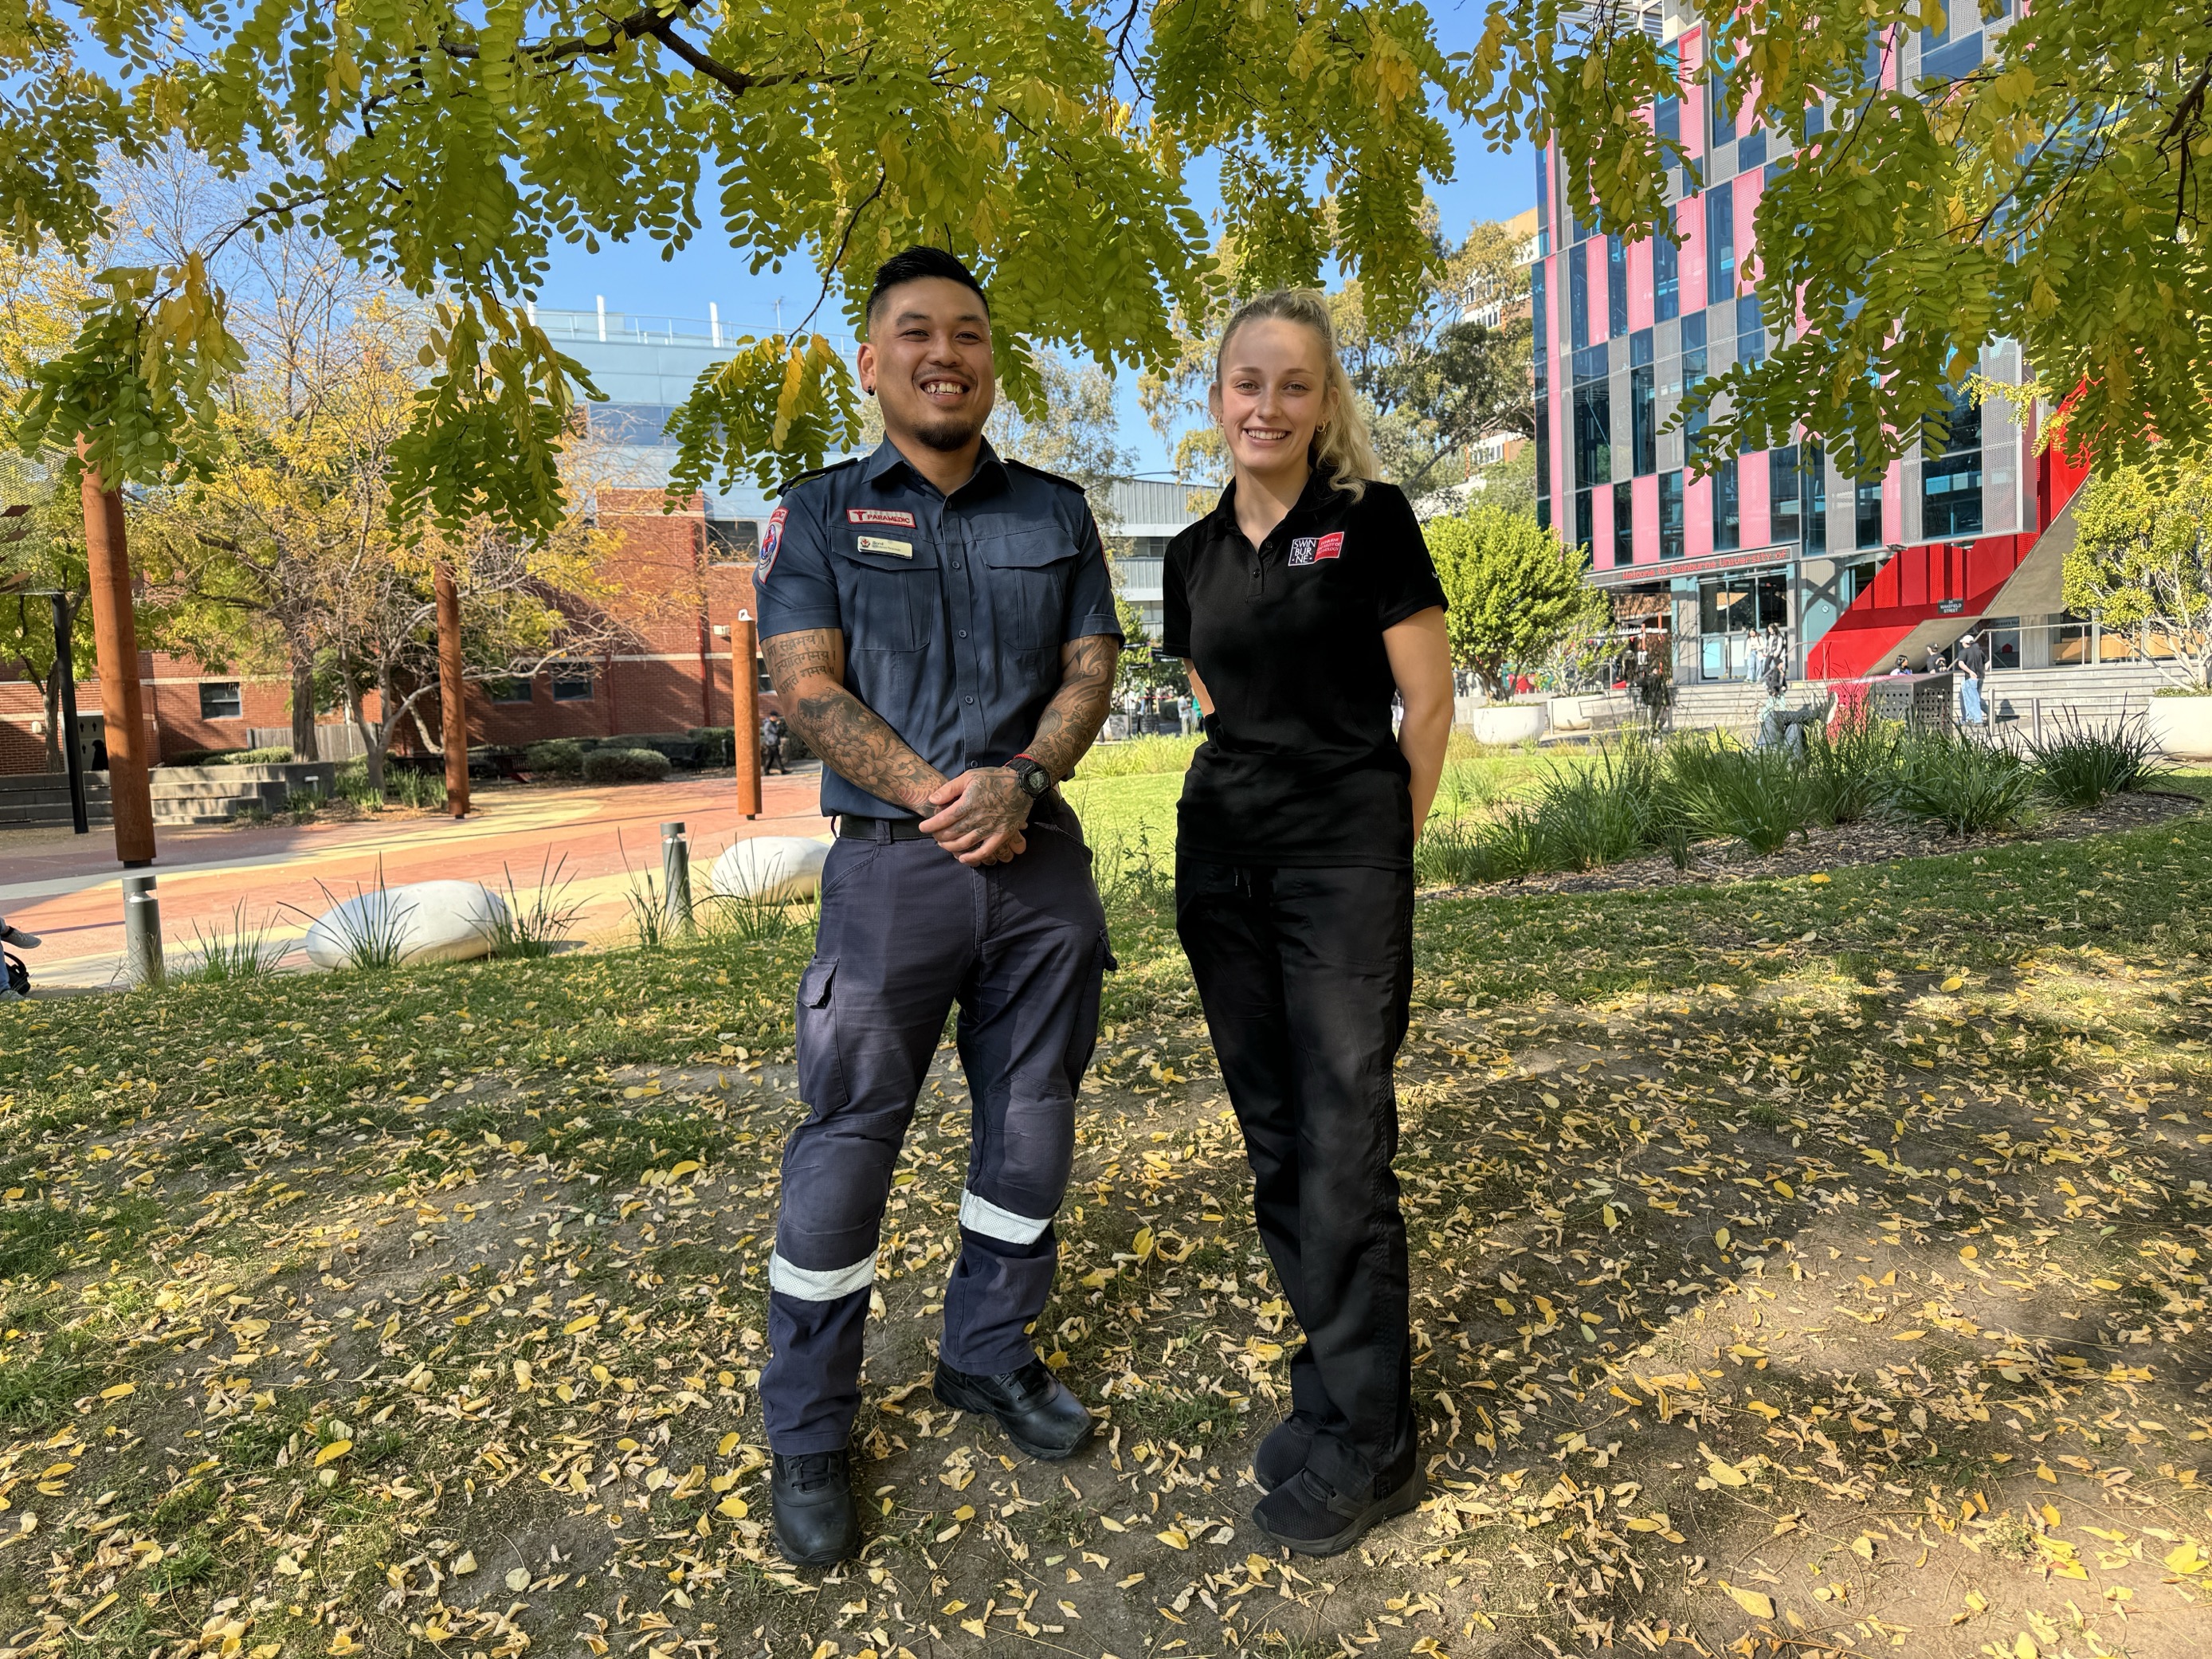 a nurse and paramedic stand together in a grassy area